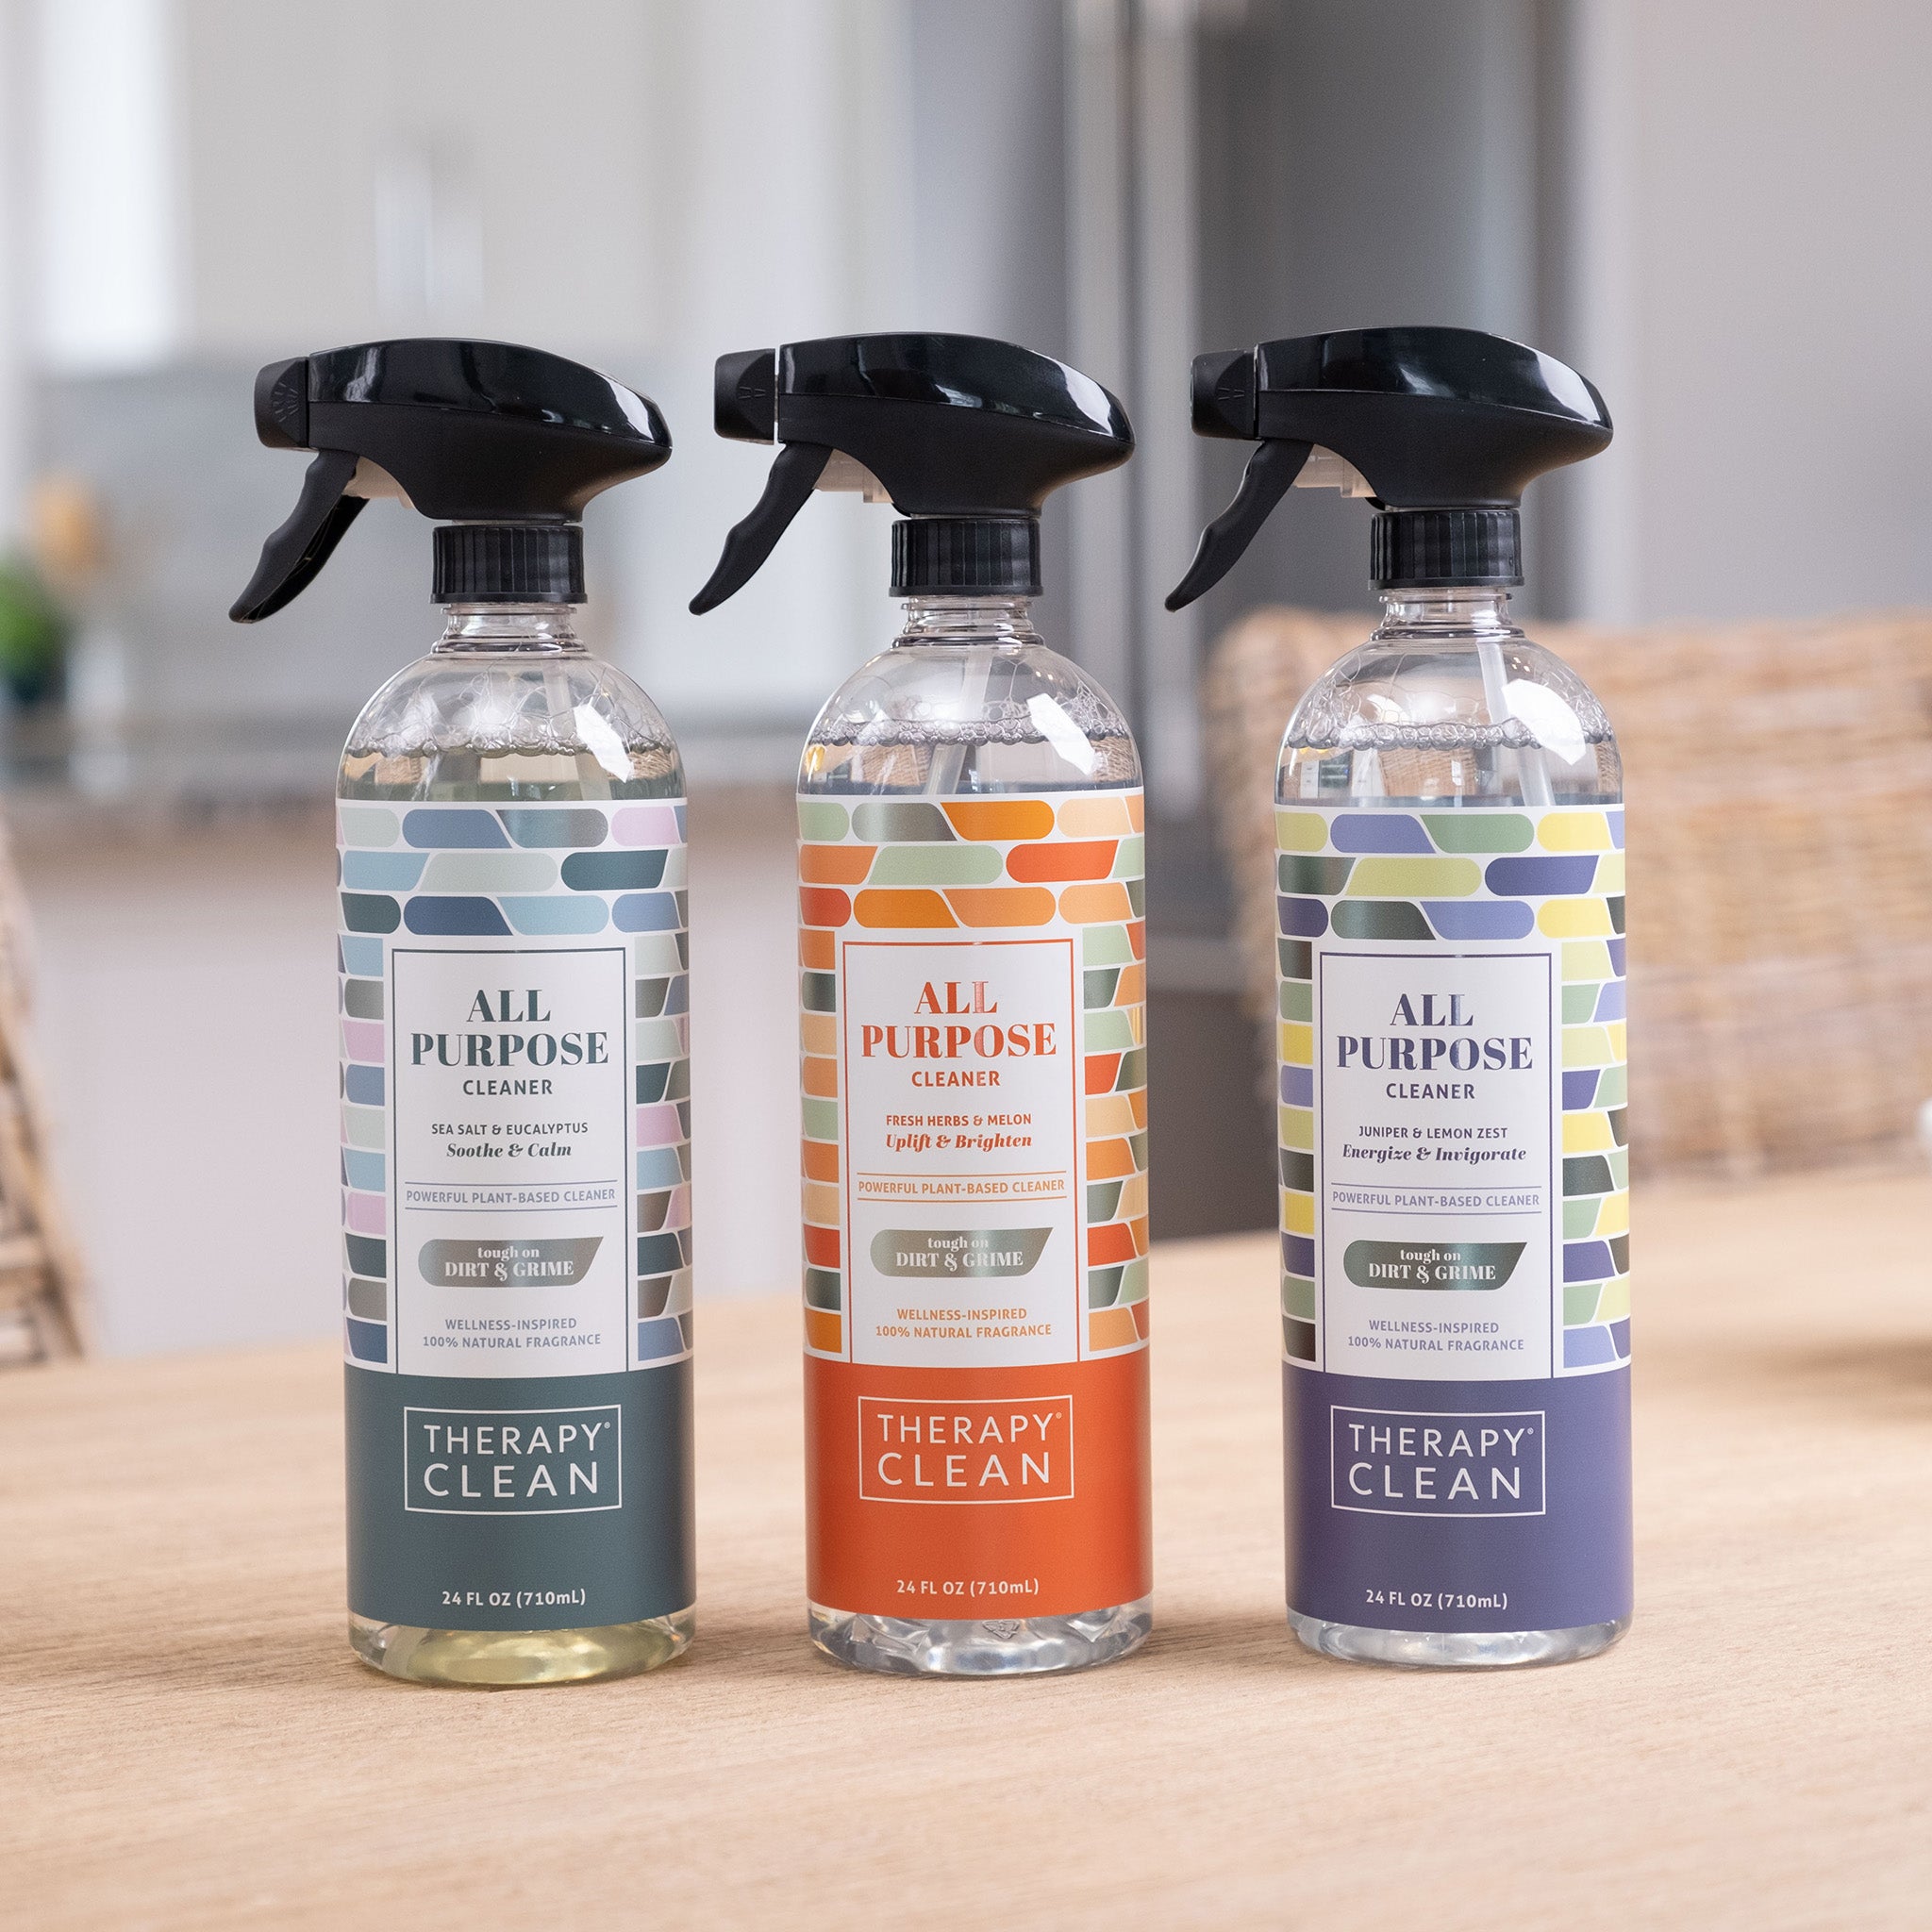 All Purpose Cleaner – P & S Detail Products